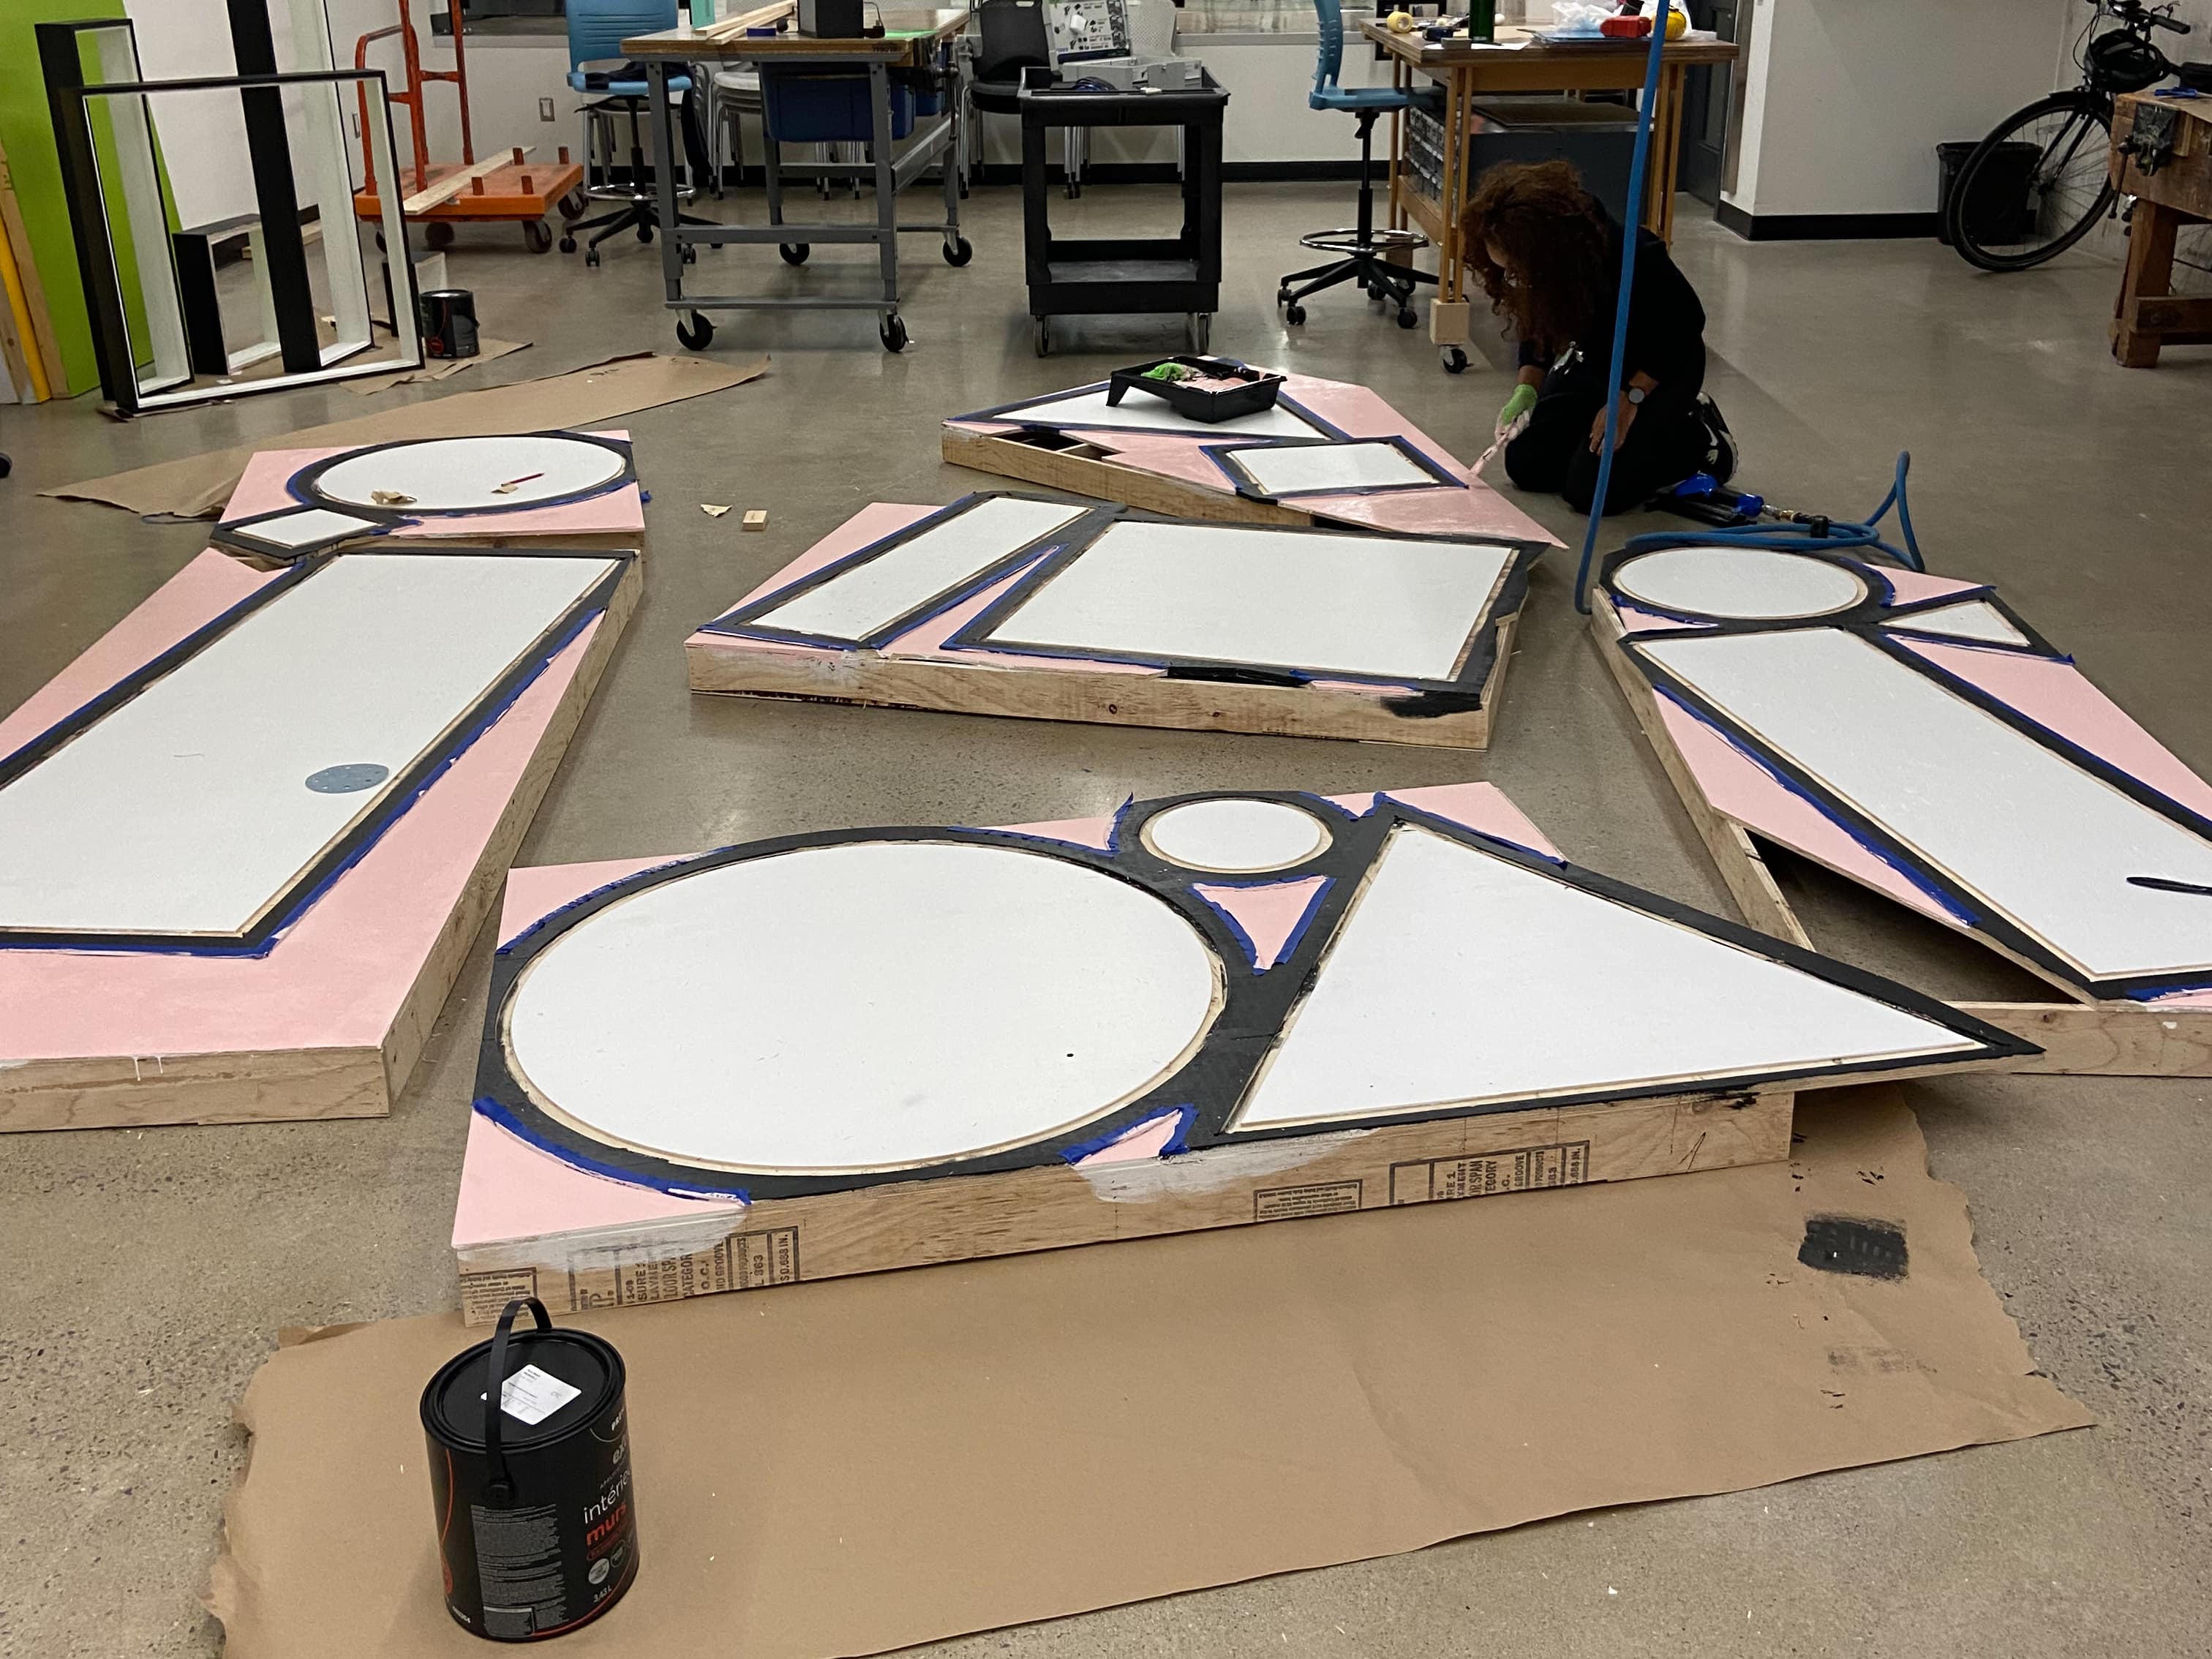 Large wooden shapes are spread out on the floor of a workshop. They are being painted white, black and light pink.